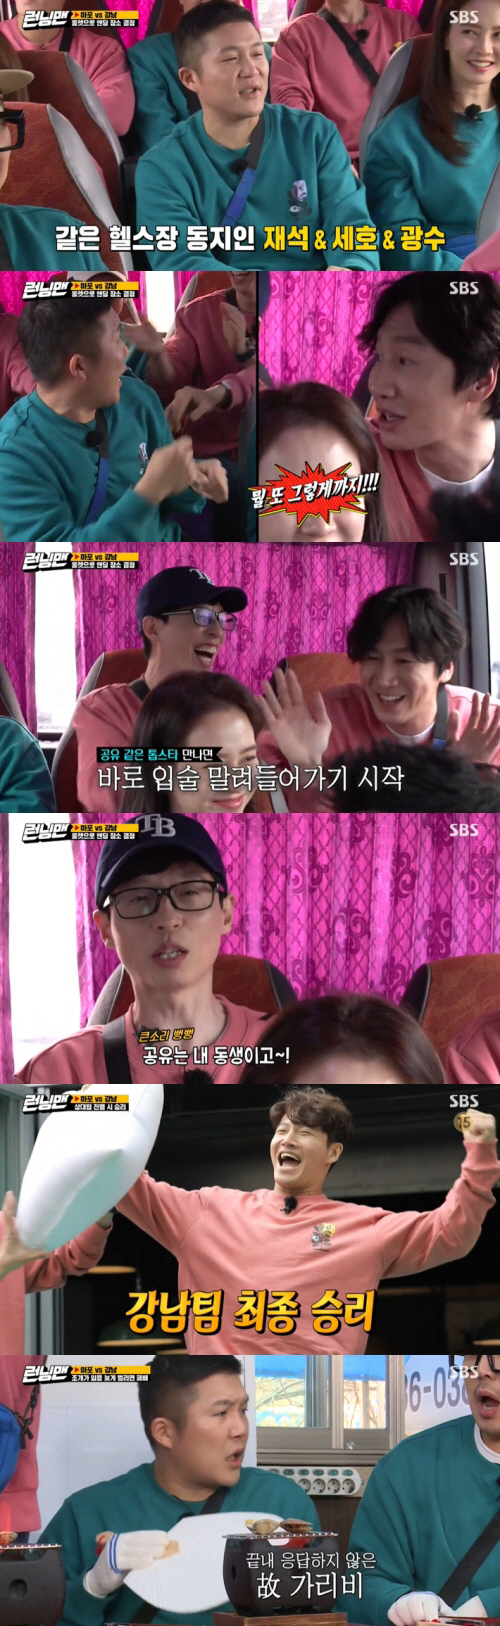 Running Man Jo Se-ho showed off his brilliant dedication as a talk bomber.Park Choa and Jo Se-ho appeared as guests on SBS Running Man broadcast on the 11th.Park Choa said, I will appear in six years.The members also gave Park Choa a generous welcome saying, I wanted to see you.On the other hand, Jo Se-ho, who has a strong relationship with the members, laughed at the appearance of not being welcomed by anyone.In particular, Kim Jong-kook made a joke about Jo Se-ho, who is called candlestick after the diet, saying, I have beaten Jung Jun-ha as a wrong example in the exercise these days.I was a real fan during the cabbage days, he said, expressing his regret for Jo Se-ho, who was slimmer with diet.Jo Se-ho said, Many people want yo-yo, but they actually keep it well.Jo Se-ho told me that he had received a call from Yoo Jae-Suk before shooting on the day, saying, I told him that I was going to Running Man.I said, Do not you want to go out? And then I said, Come out and stay like a doll and go. Kim Jong-kook repeatedly expressed regret that it was more funny to talk about the same thing in the past, and Jo Se-ho laughed and laughed, The object should not do that.On the other hand, in Running Man, Yoo Jae-suk, Ji Suk-jin, Kim Jong-kook, Lee Kwang-soo, Park Choa were divided into Gangnam District Team, Haha, Song Ji-hyo, Jeon So-min, Yang Se-chan and Jo Se-ho were divided into DJ Maphorisa Team. Hahas Sweet and bloody work route Race unfolded.This race starts at the middle of the two regions and moves one step closer to the team area that won the mission.Thanks to the team Kim Jong-kook of Gangnam District, which won first place in the pre-mission, the first mission place was decided to be Banpo Tteokbokki.The Park Choa look got better - its brighter than it used to be, the members said in the car moving to the mission site.Yoo Jae-Suk then asked, How about when you are playing the team and when you are alone? Park Choa replied, The advantage can reduce shop time; originally, I waited for two teams.The members who arrived at the mission site then played a quiz showdown with the first mission.The Gangnam District team, which included brains such as Yoo Jae-Suk, Kim Jong-kook and Ji Suk-jin, was delighted at the word quiz, but DJ Maphorisas team was devastated.In a quiz showdown that matches various unit symbols, DJ Maphorisa team as well as Gangnam District team were also struggling.With the wrong answer in the air, Haha hurriedly shouted to his son who was watching the broadcast, Stop the hard drive TV. Do your homework. Write a diary.Also unlike usual, Yoo Jae-Suk also had a misrepresentation parade, so Haha said, Gihodo turn off the TV, and Yoo Jae-Suk said, No, look.My dad works so hard. In the next initial quiz showdown, the Gangnam district team except Kim Jong-kook showed a weak figure.In the end, the victory was won by DJ Maphorisa, and Roulette Khan also secured an additional.With DJ Maphorisas victory setting the next mission venue as a Dongbing Go-dong, Yoo Jae-Suk unexpectedly invited Jo Se-ho to talk in a moving car.Jo Se-ho continued to feel sorry for my nickname is a talk bomber, but Kim Jong-kook continued to say, I lost weight and I lost a lot of sense.In the end, Jo Se-ho said, Is Kim Jong-kook a good fight? And Haha laughed, saying, I saw it 7:1.Jo Se-ho then started Disclosure on Lee Kwang-soo, who attends the same gym.Jo Se-ho, who perfectly depicts Lee Kwang-soo, who struggles with a distorted expression, said, It was like weighing a weight that should not be done.Seriously, which baffled Lee Kwang-soo; also, Lee Kwang-soo disclosured Yoo Jae-Suks top star prick.If Jae-seok is a Seho brother (at the gym) or I am there, he comes and points out, What are your pants? And when he meets someone like Gong Yooo, his lips are dried up, he said.Yoo Jae-Suk was embarrassed, but Gong Yoo is my brother Stephanie Herseth Sandlin laughed.The second mission at the Dongbinggo-dong Korean restaurant was to sit on the average and attack the other person with a pillow.Kim Jong-kook smiled with a smile when he said the pillow fight was a mission.The commission was also carried out in the strong protest of DJ Maphorisas team, and as expected, the Gangnam District team with Kim Jong-kook won.Both teams, who moved back to Gangnam District, each baked a shell in a private furnace and conducted a mission in which the team with the unopened shells was defeated until the end.Lee Kwang-soo, Jo Se-ho, and Haha remained until the end of the match, and Jo Se-hos scallop did not open up until the end, so the Gangnam District team won again.At the last place, Yeoksam-dong dessert cafe, a victory was made when you read the words attached to your opponent first.Just before the end of the mission, Park Choa won a dramatic victory, and the Gangnam District team won the victory, and the Gangnam District team, which won a lot of roulette compartments in the final ending place lottery, was selected and decided to be Gangnam District Ending.